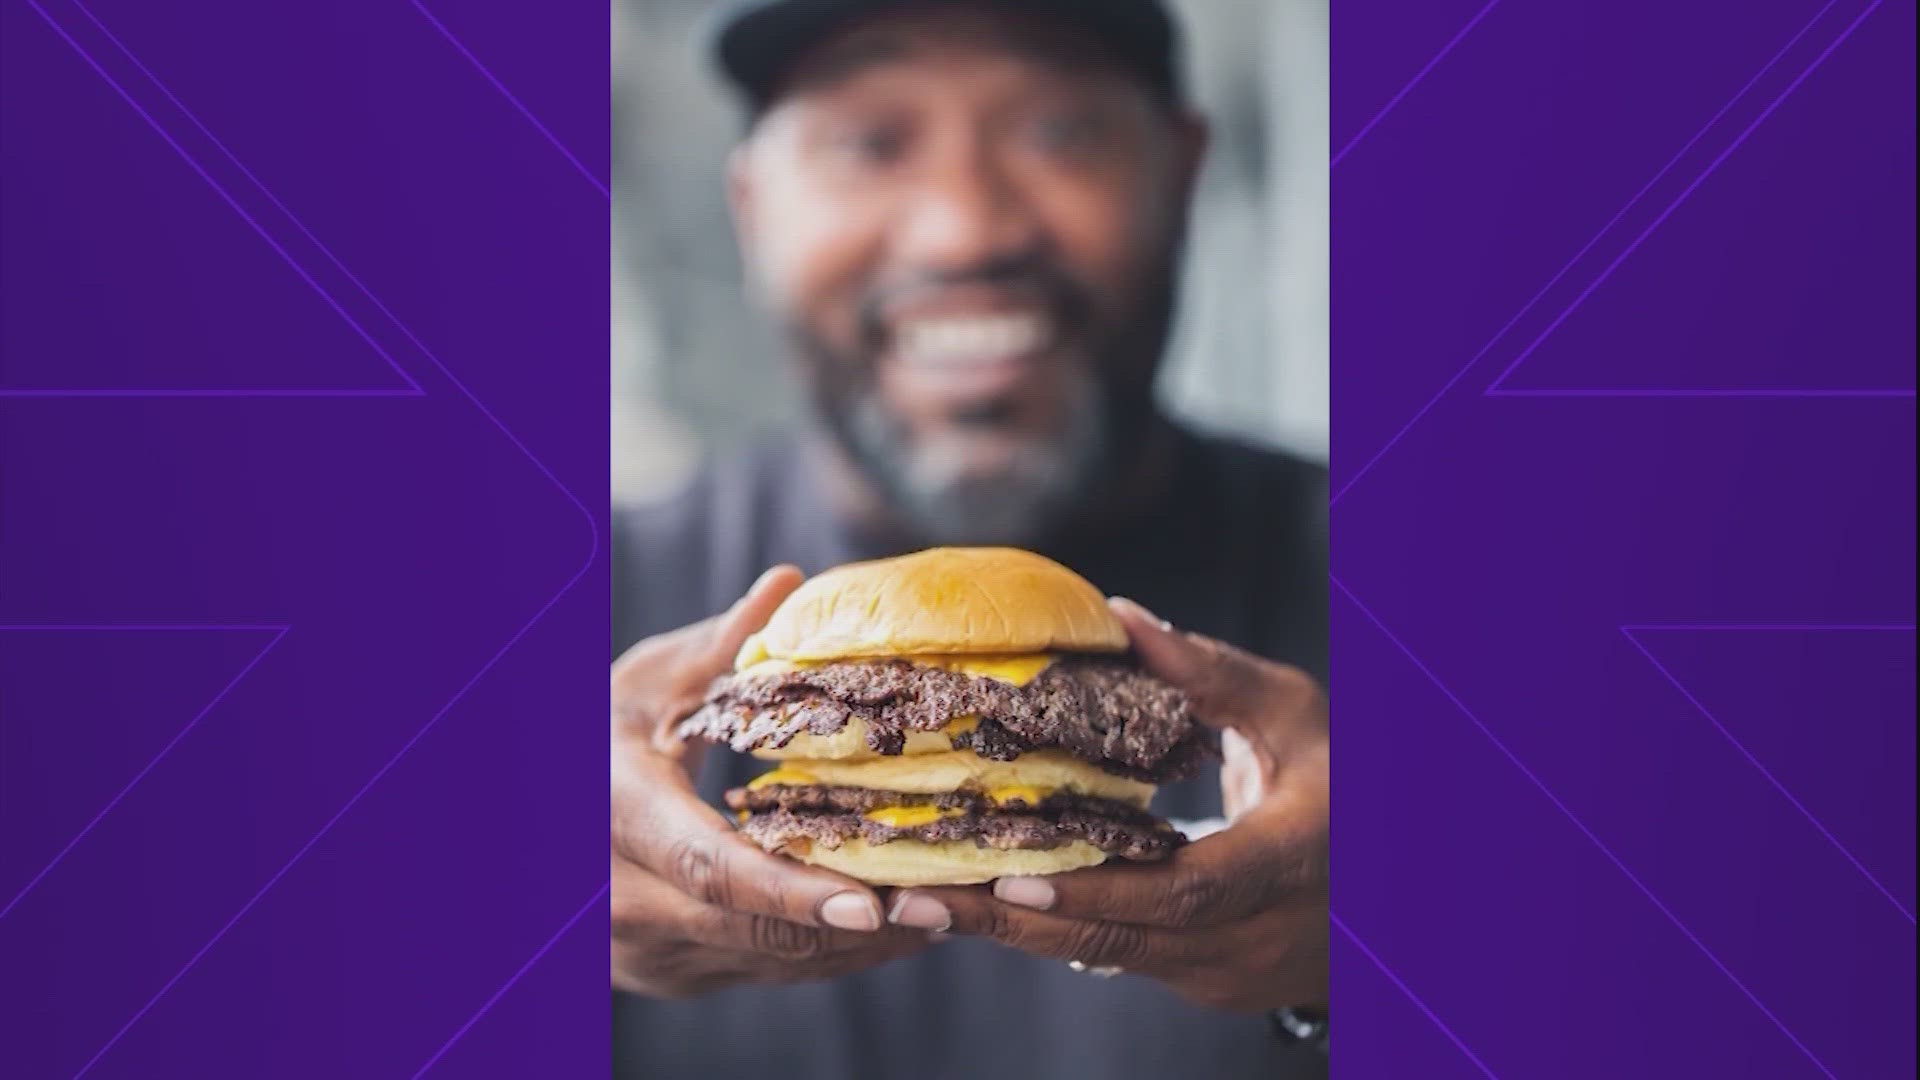 Trill Burgers has become one of the most popular burgers in Houston -- move over Whataburger -- since the COVID-19 pandemic.